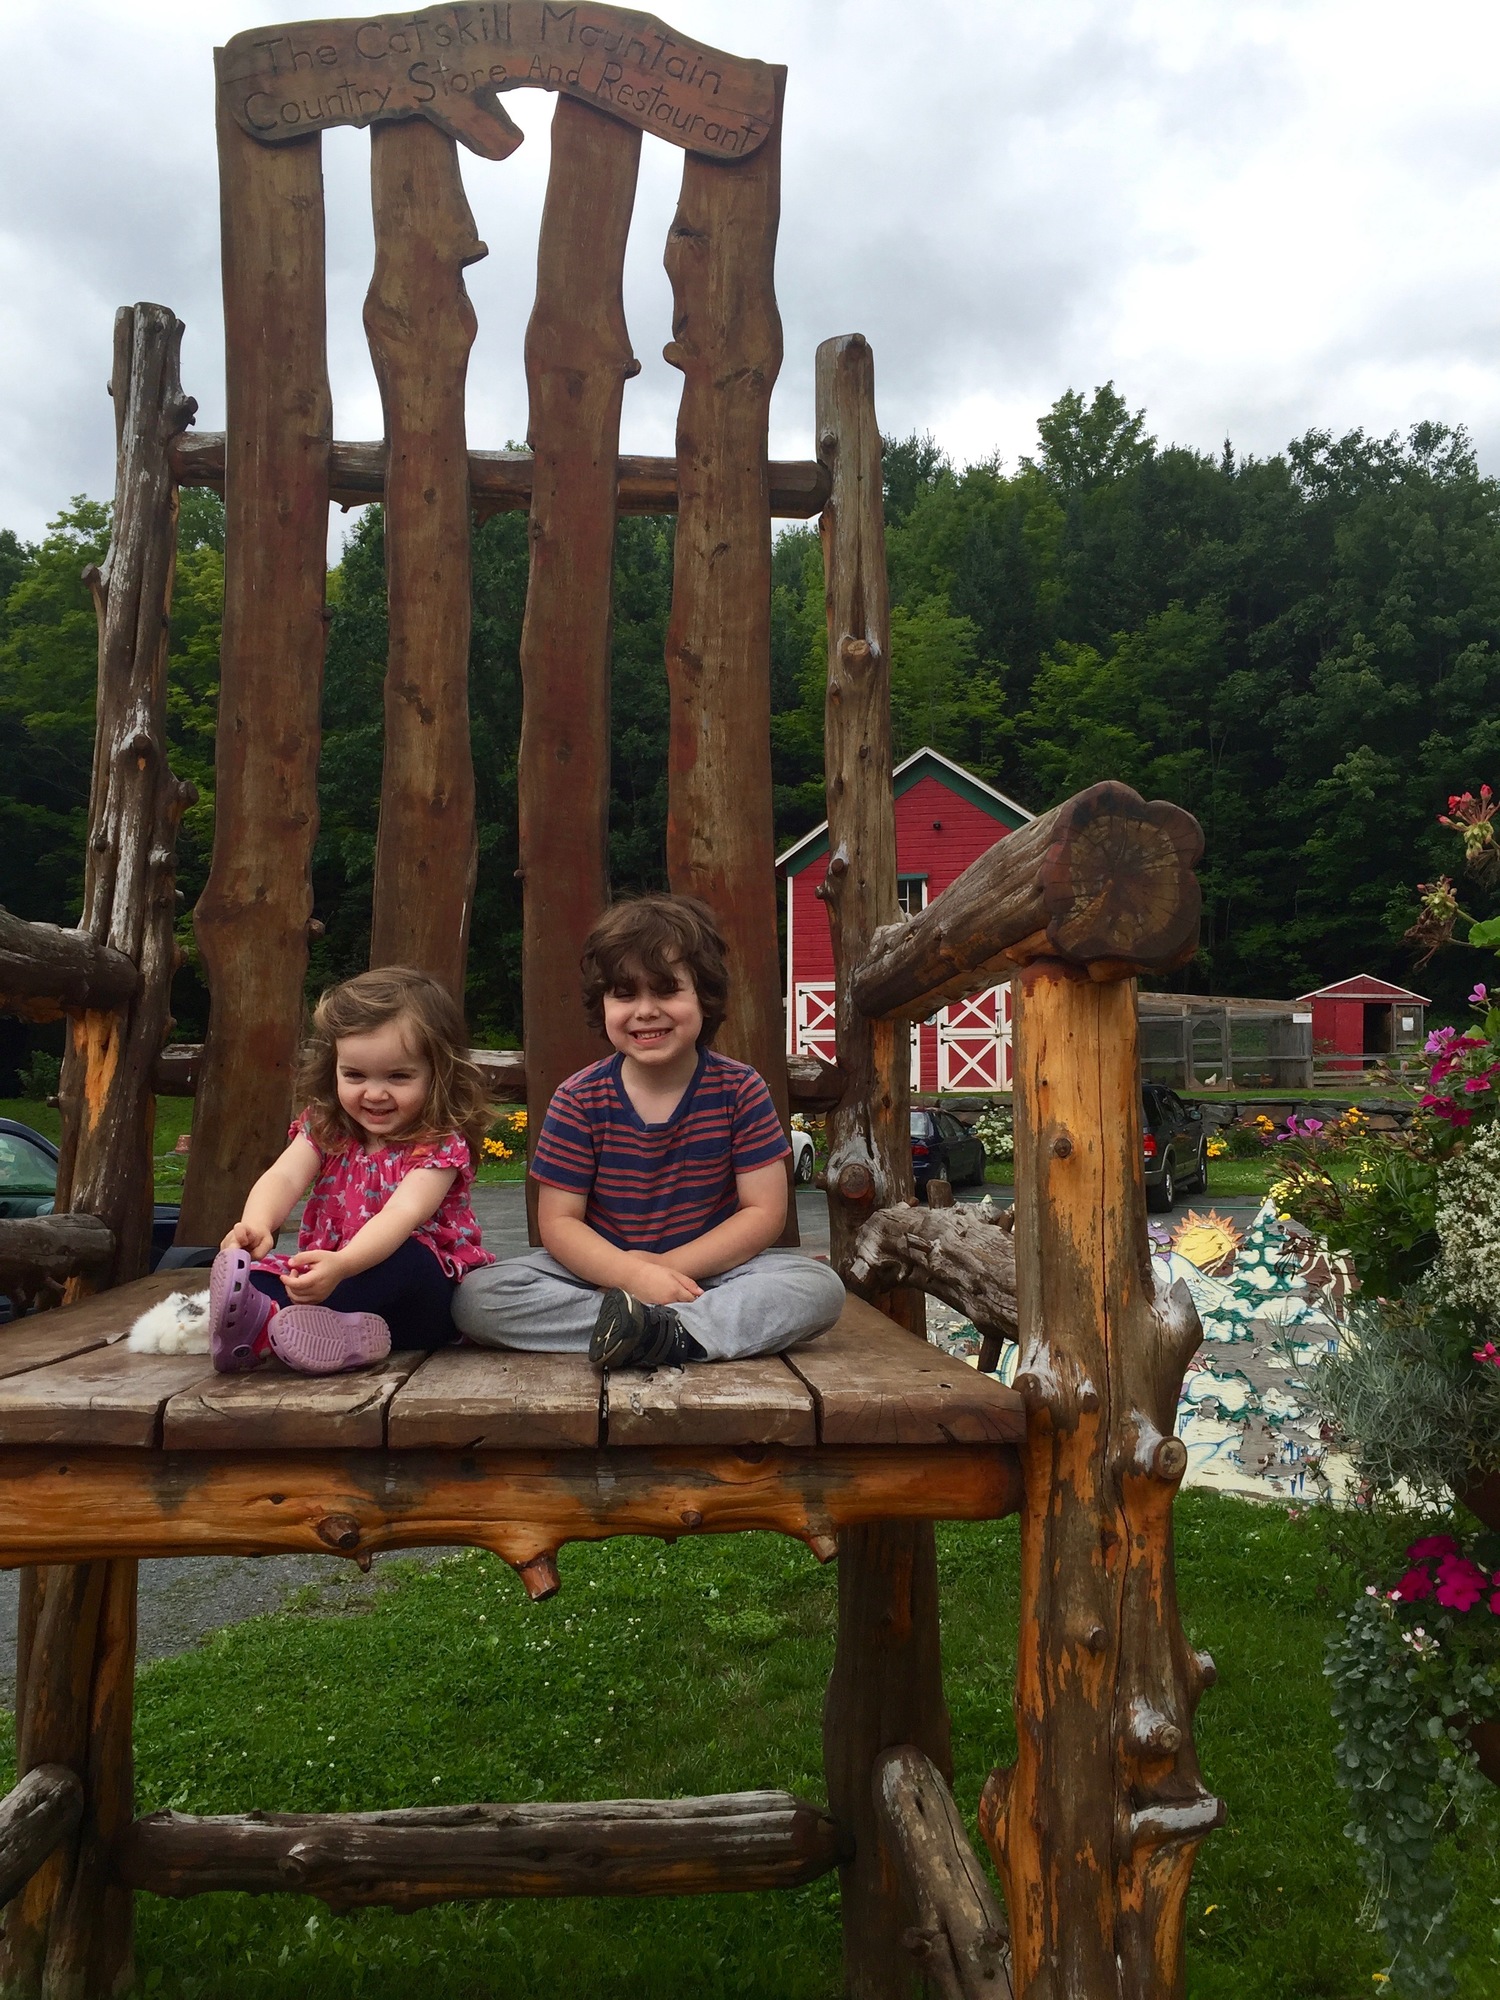 Catskill Mountain Country Store: A Child's Paradise